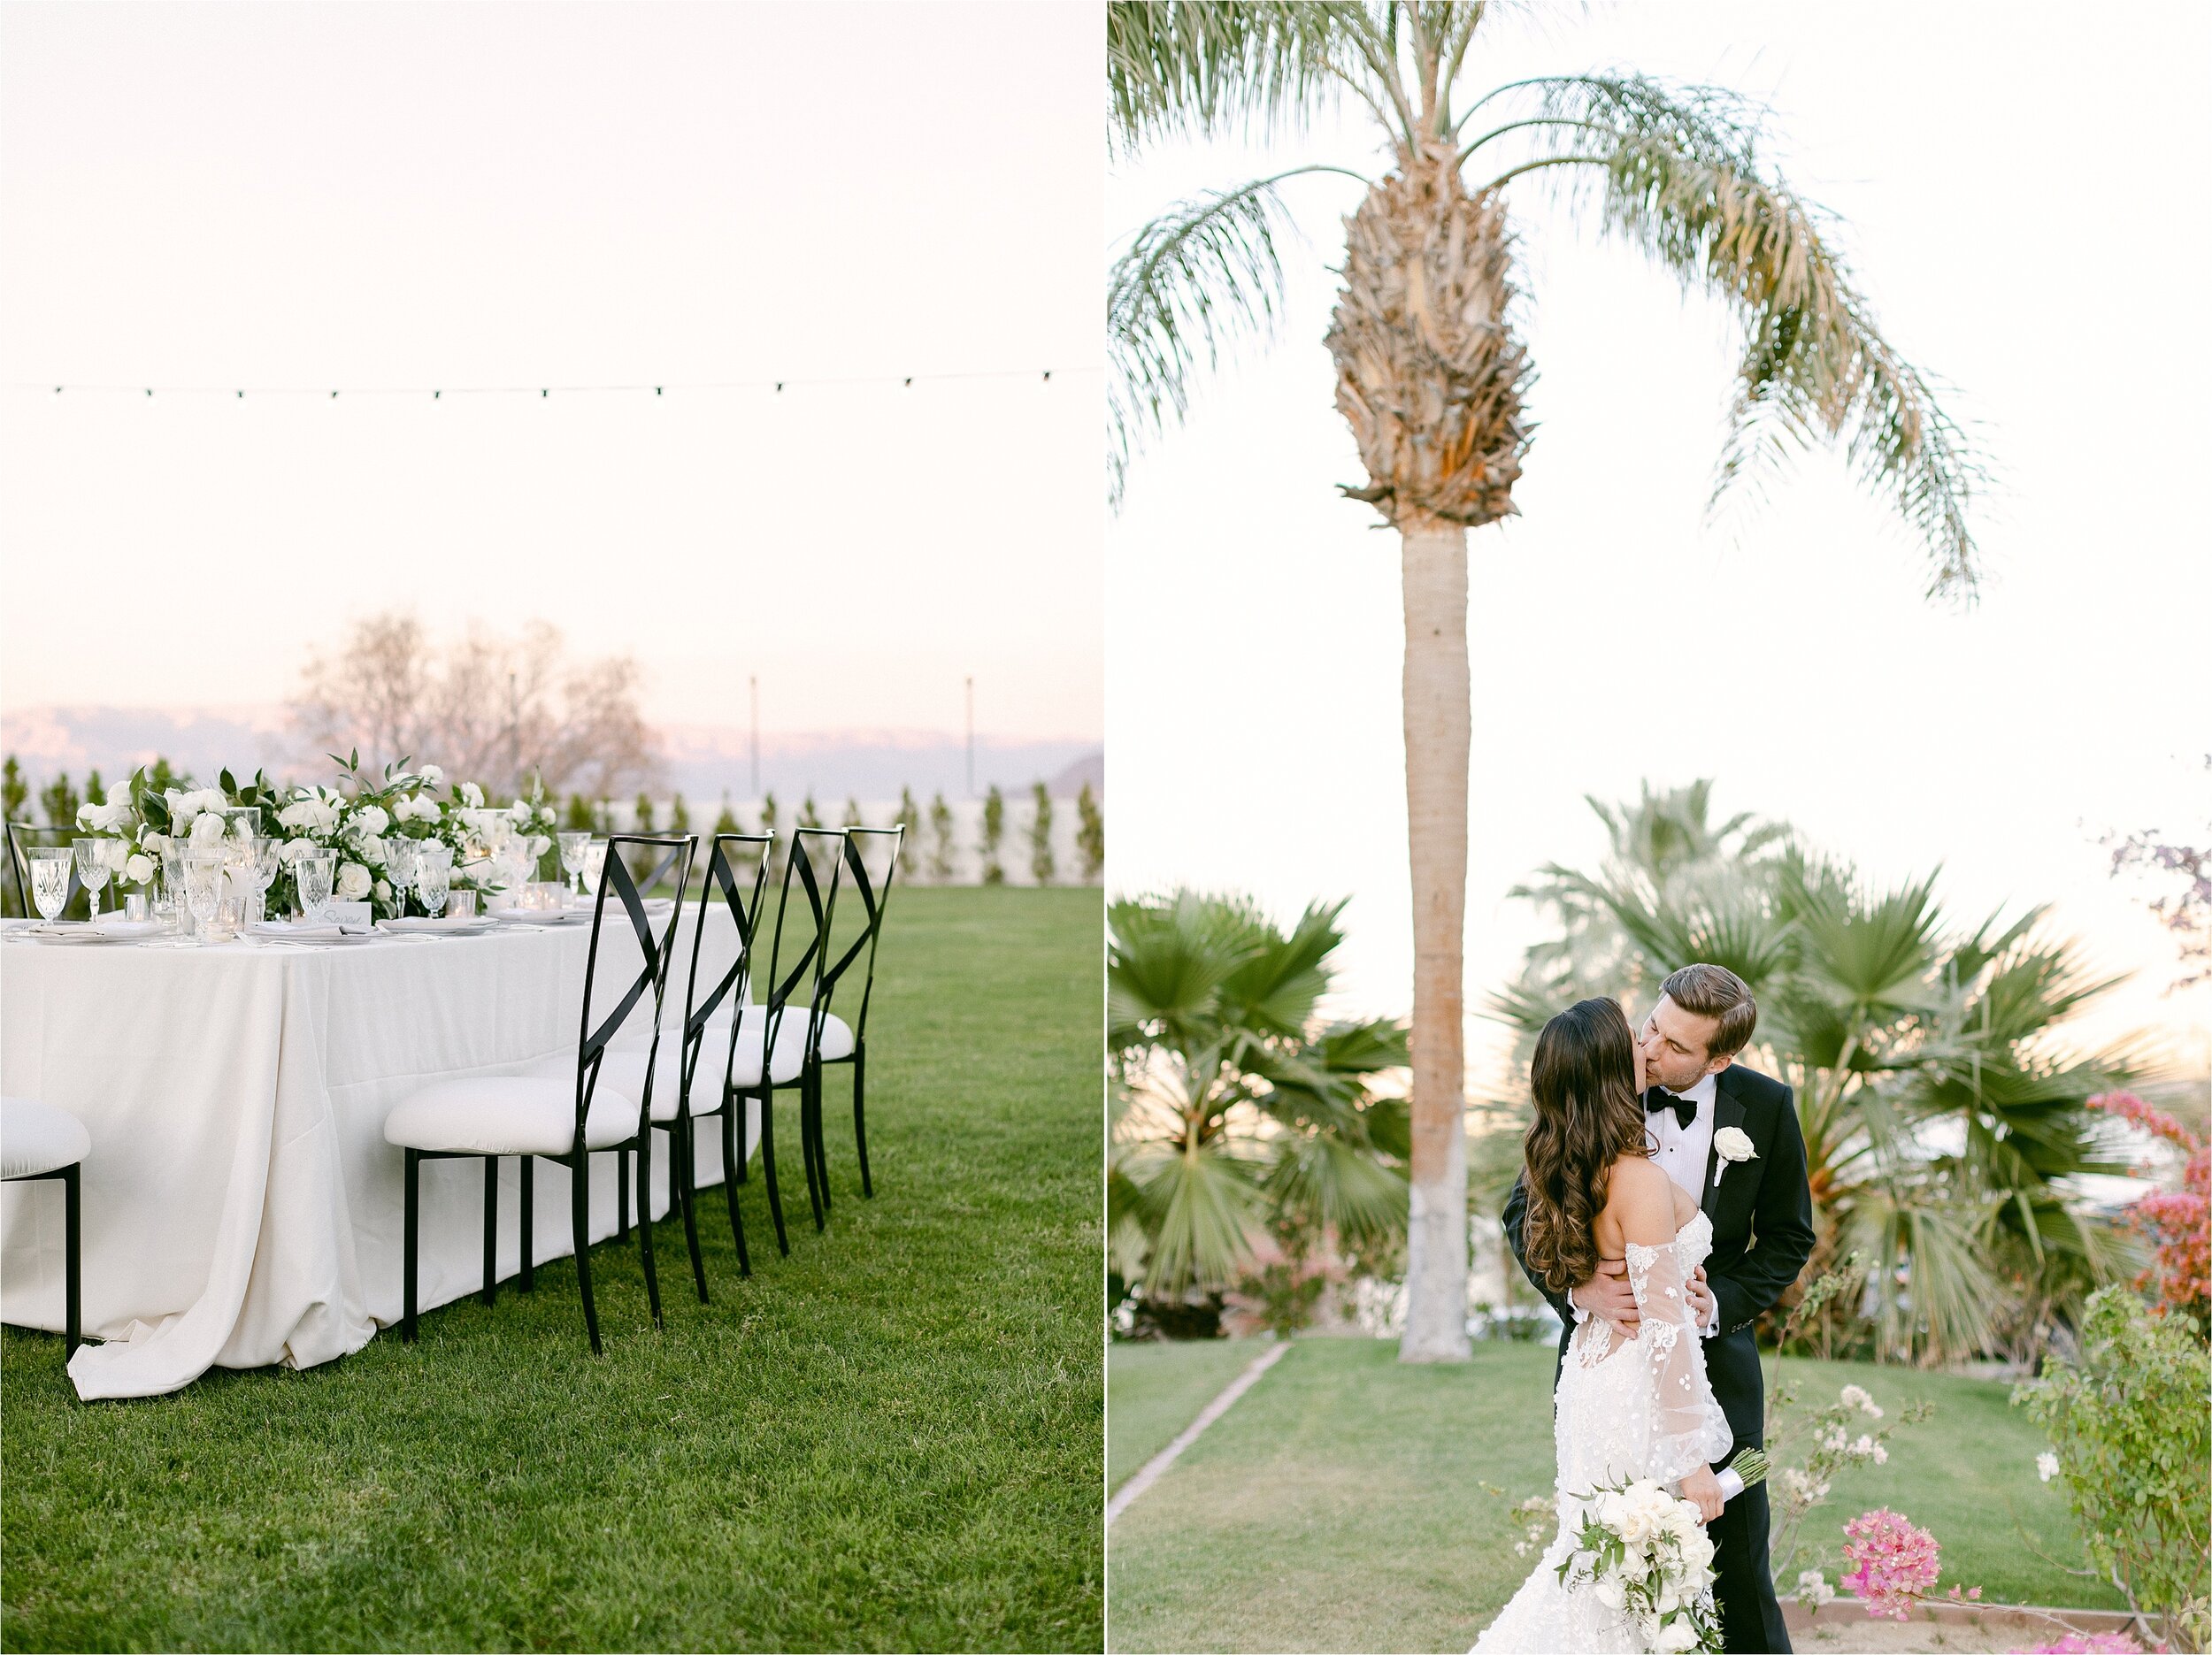 Vibrant Palm Springs Destination Wedding Venue.  Featuring outdoor reception on grass lawn featuring black metal chairs with white cushions, white linens, white florals and crystal glassware.